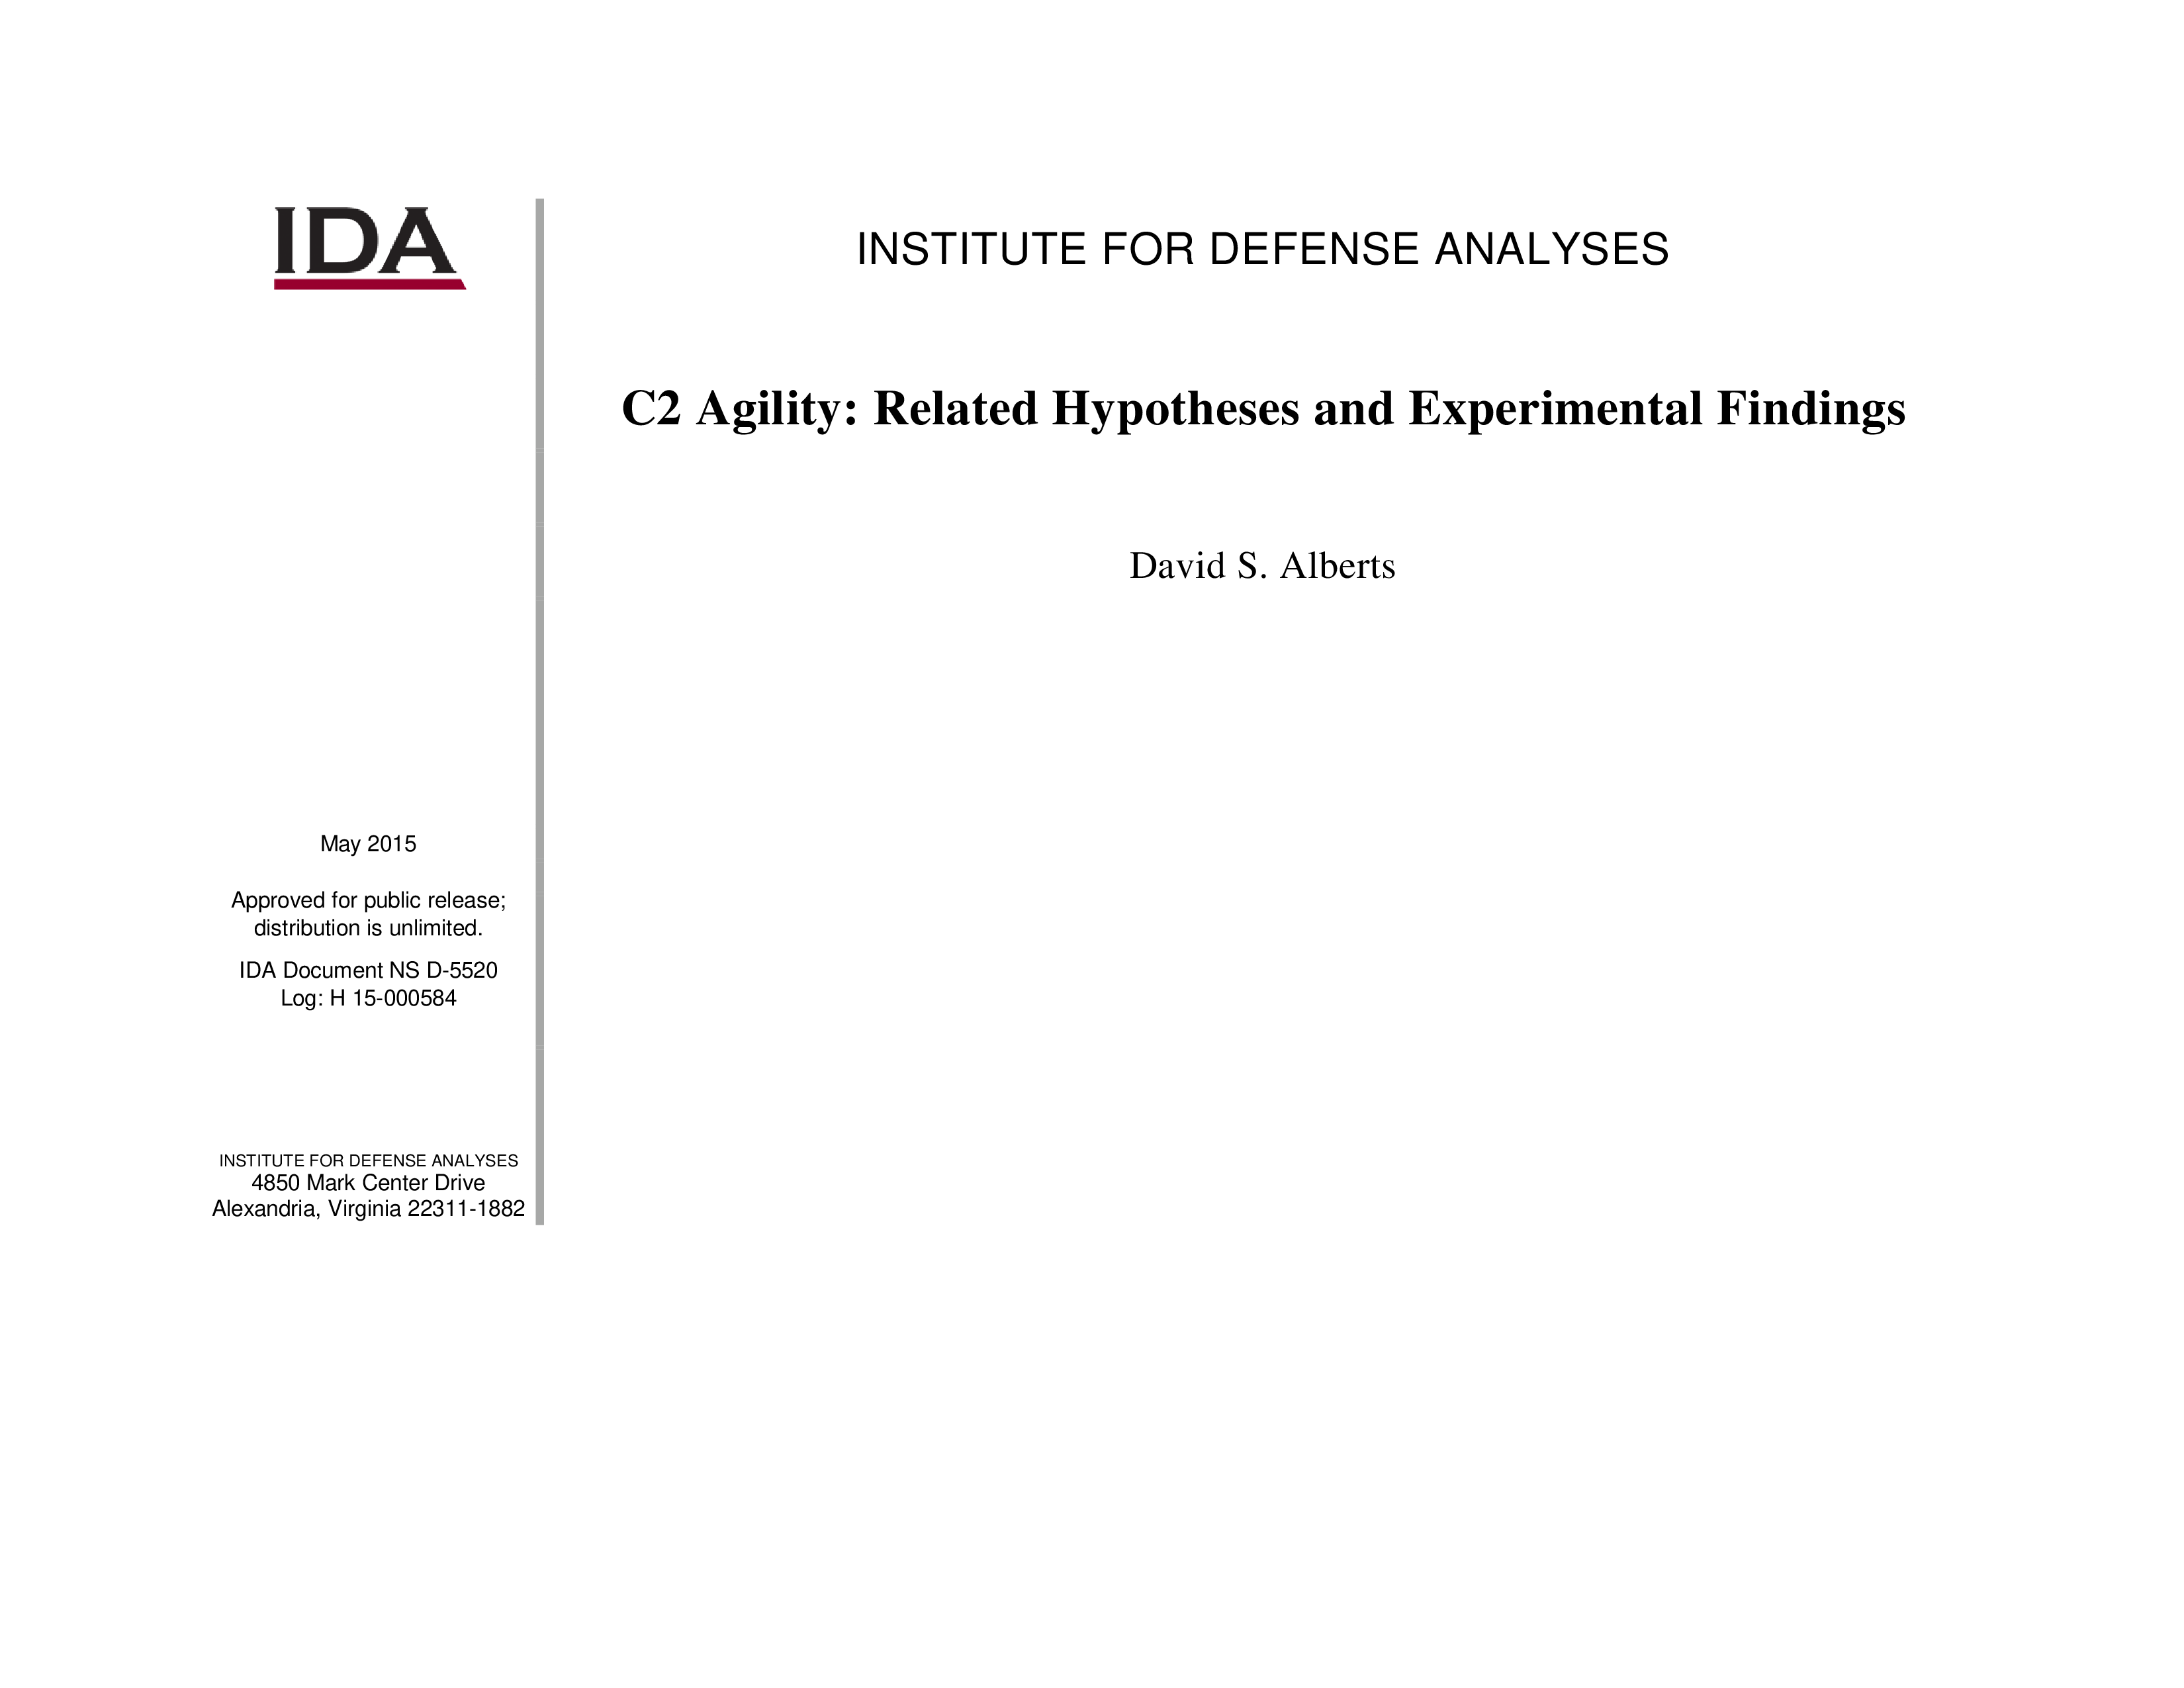 C2 Agility: Related Hypotheses and Experimental Findings